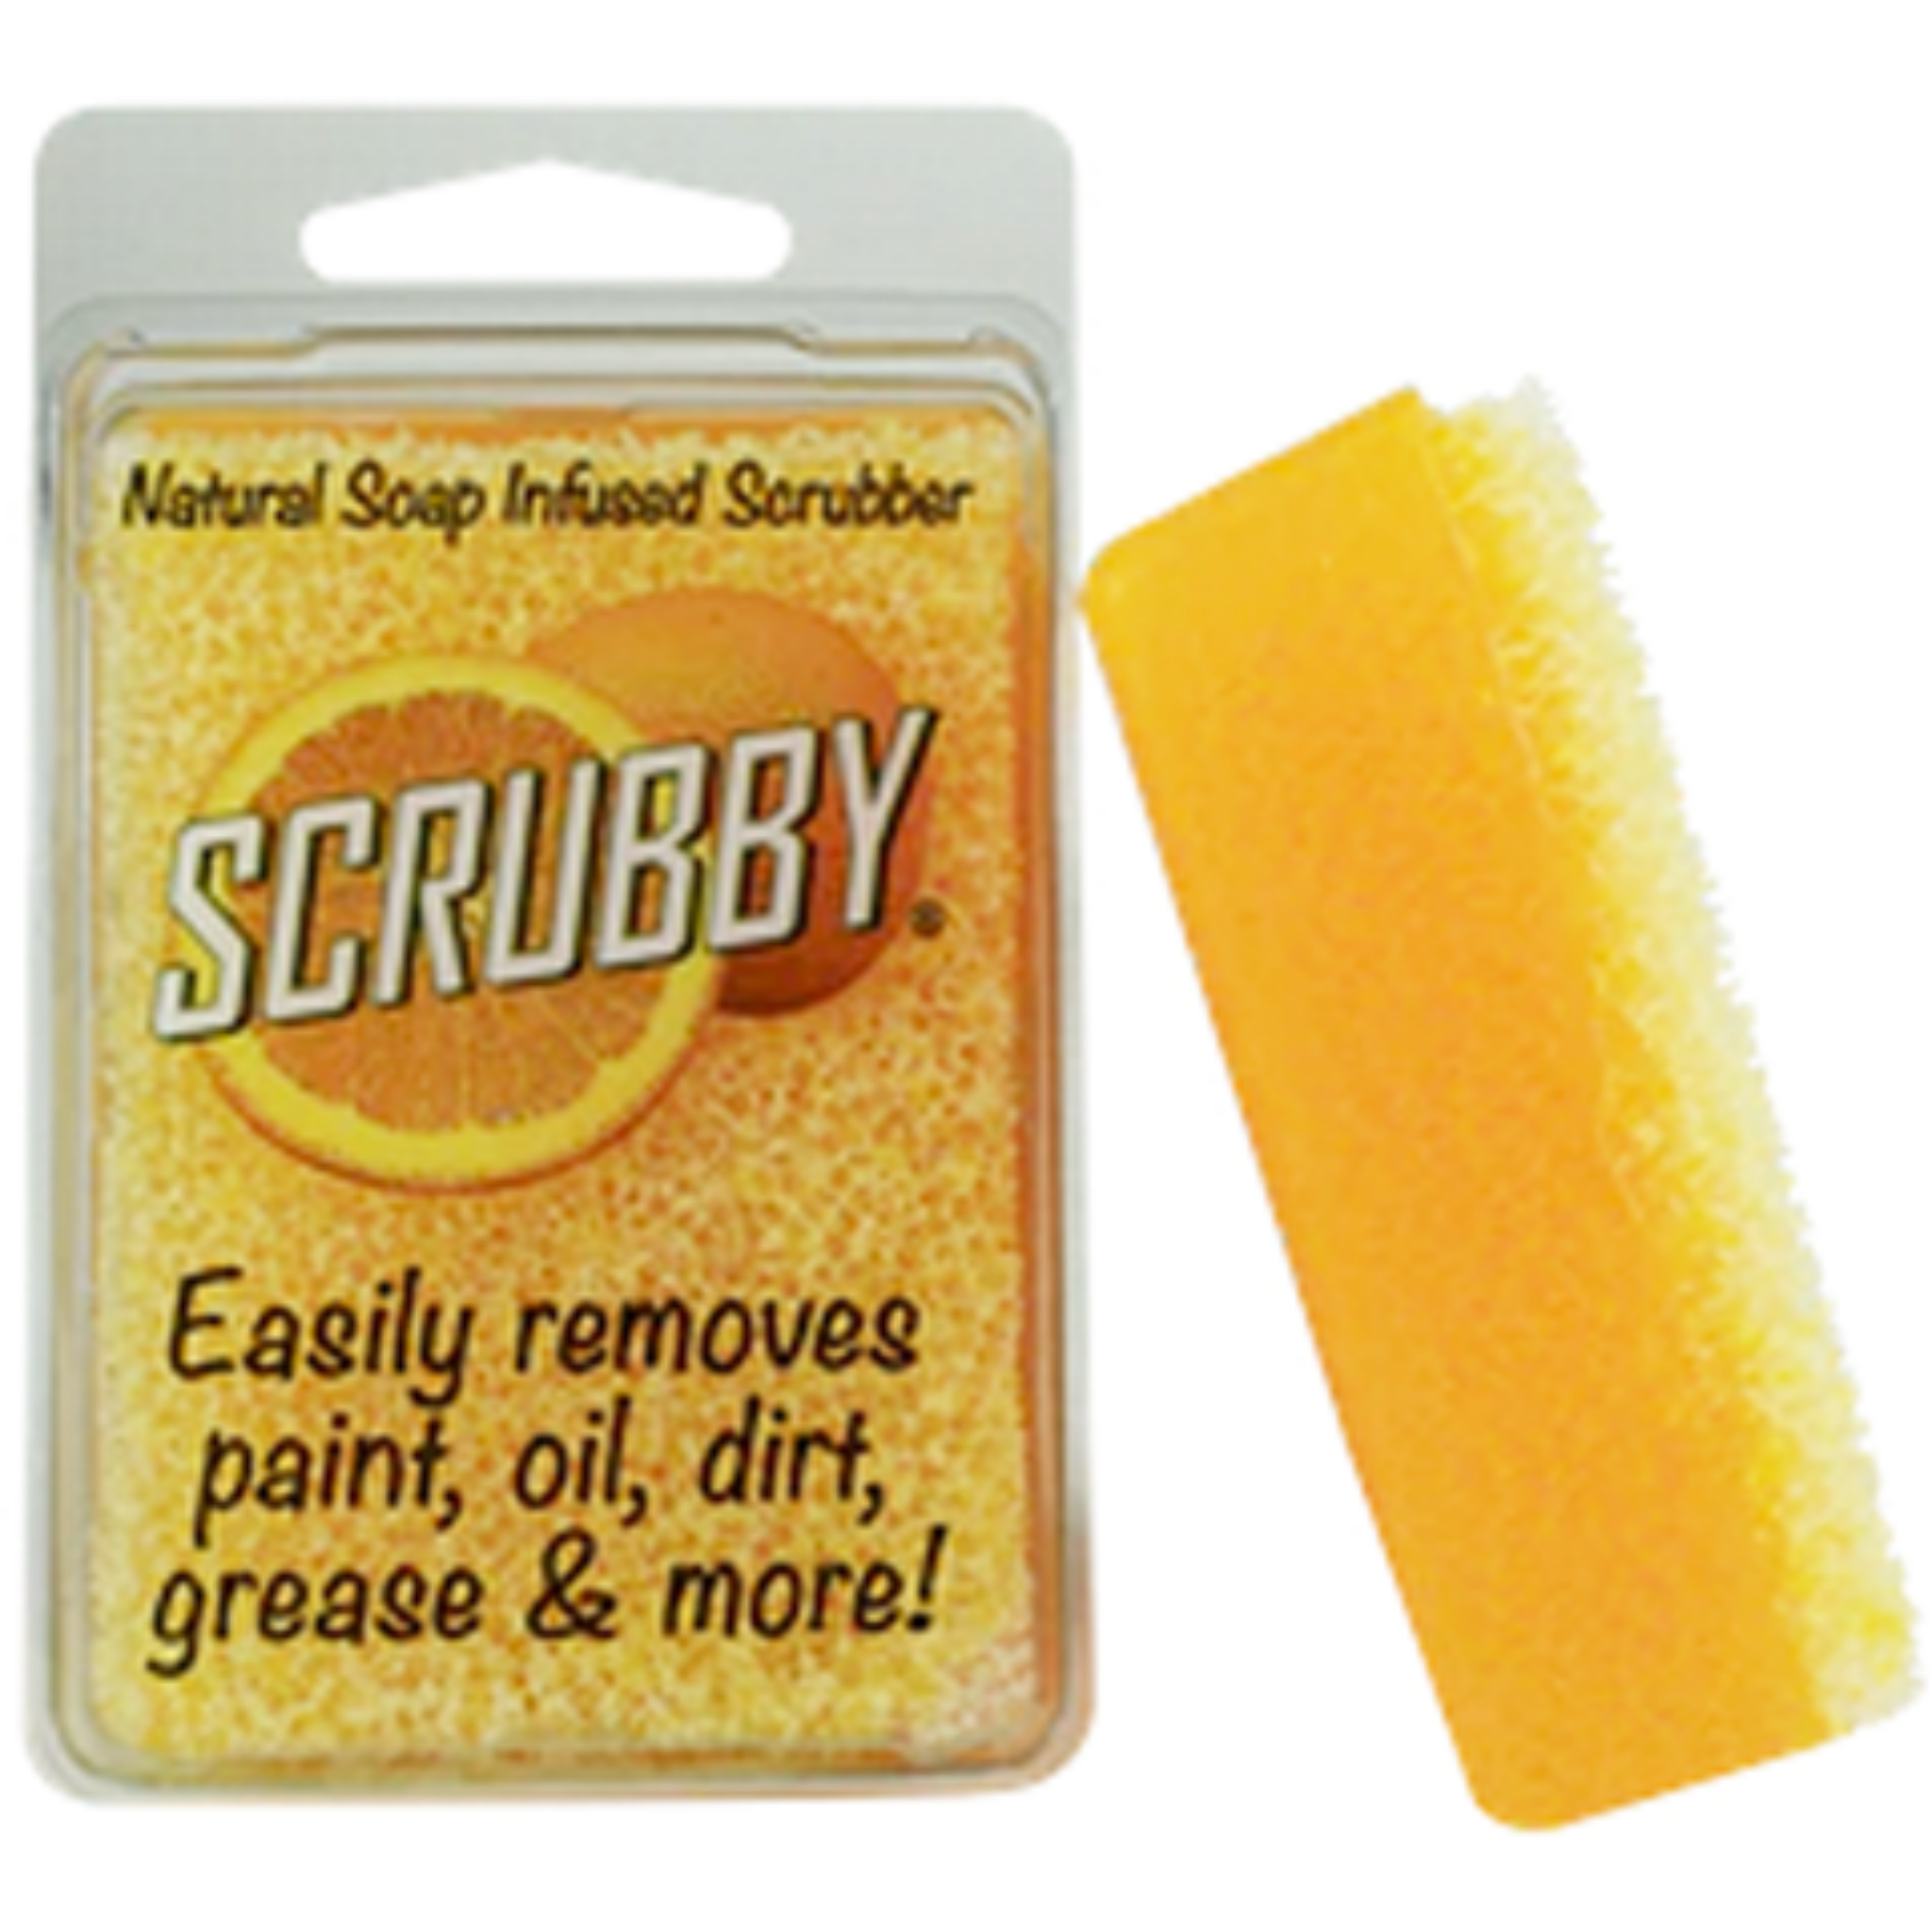 Orange scrubby soap on a white background. It reads Natural soap infused scrubber. Easily removes paint, oil, dirt, grease & more!